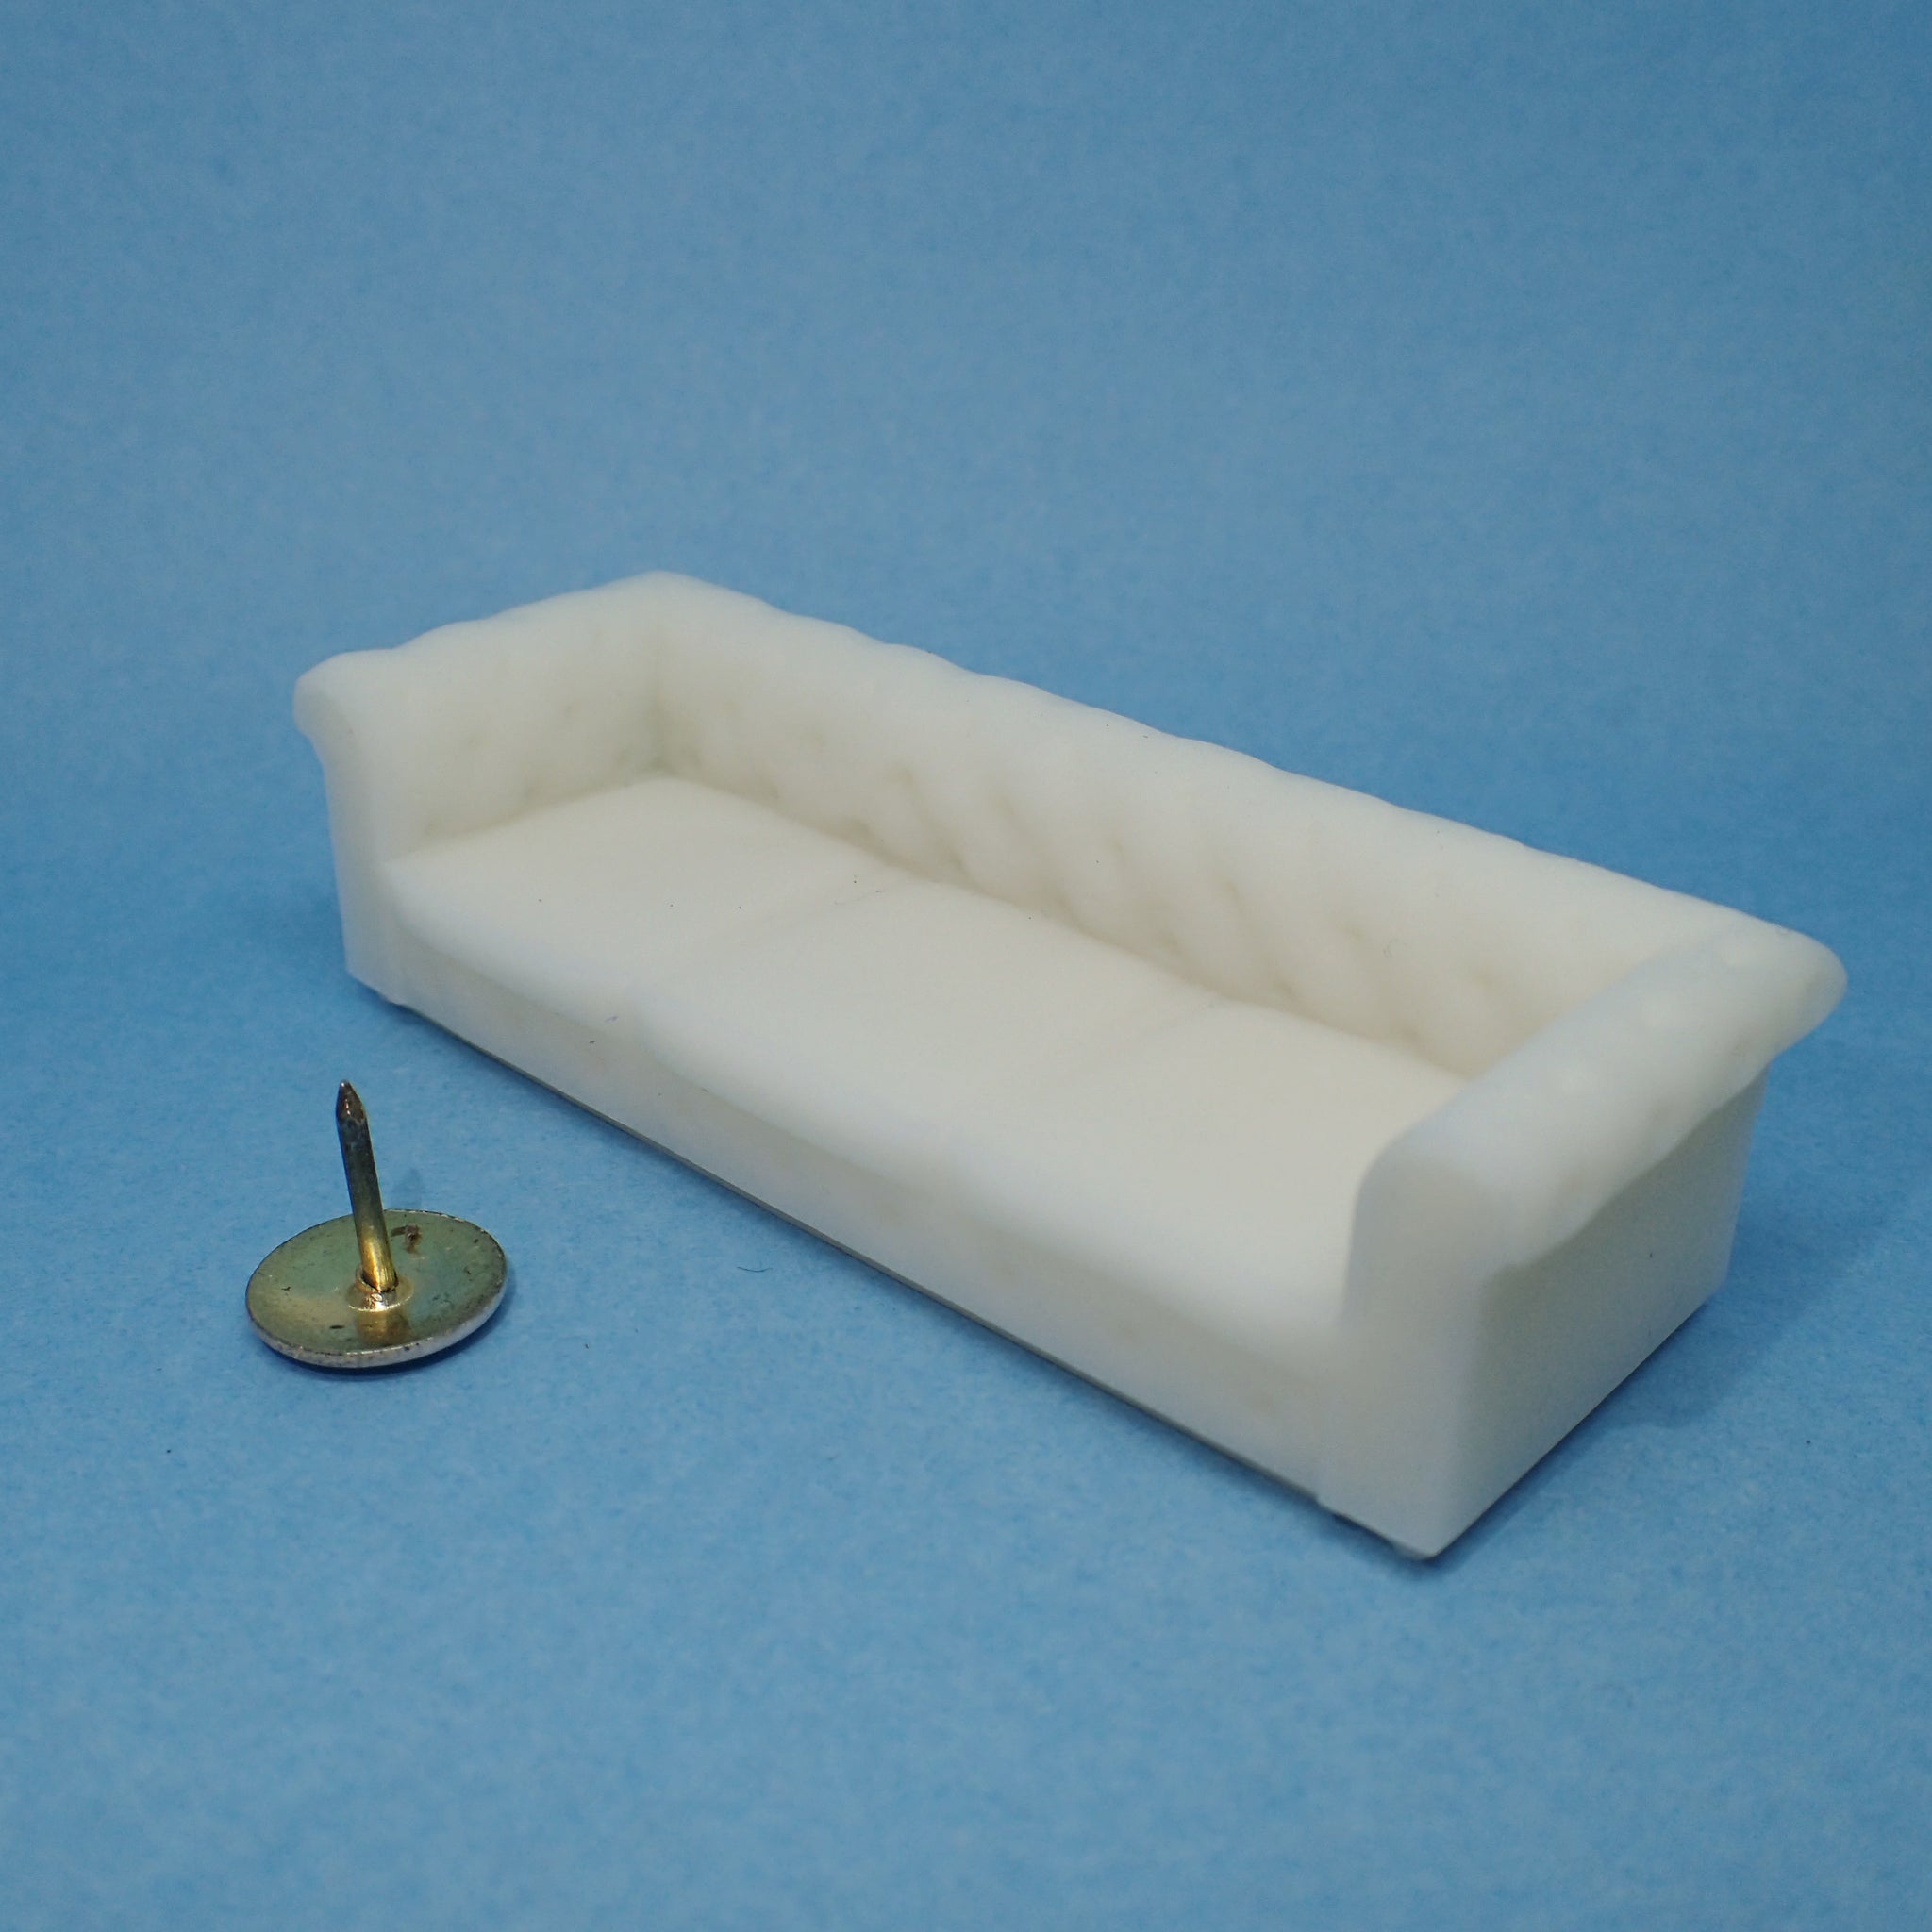 3 seat Chesterfield sofa, 1/48th scale